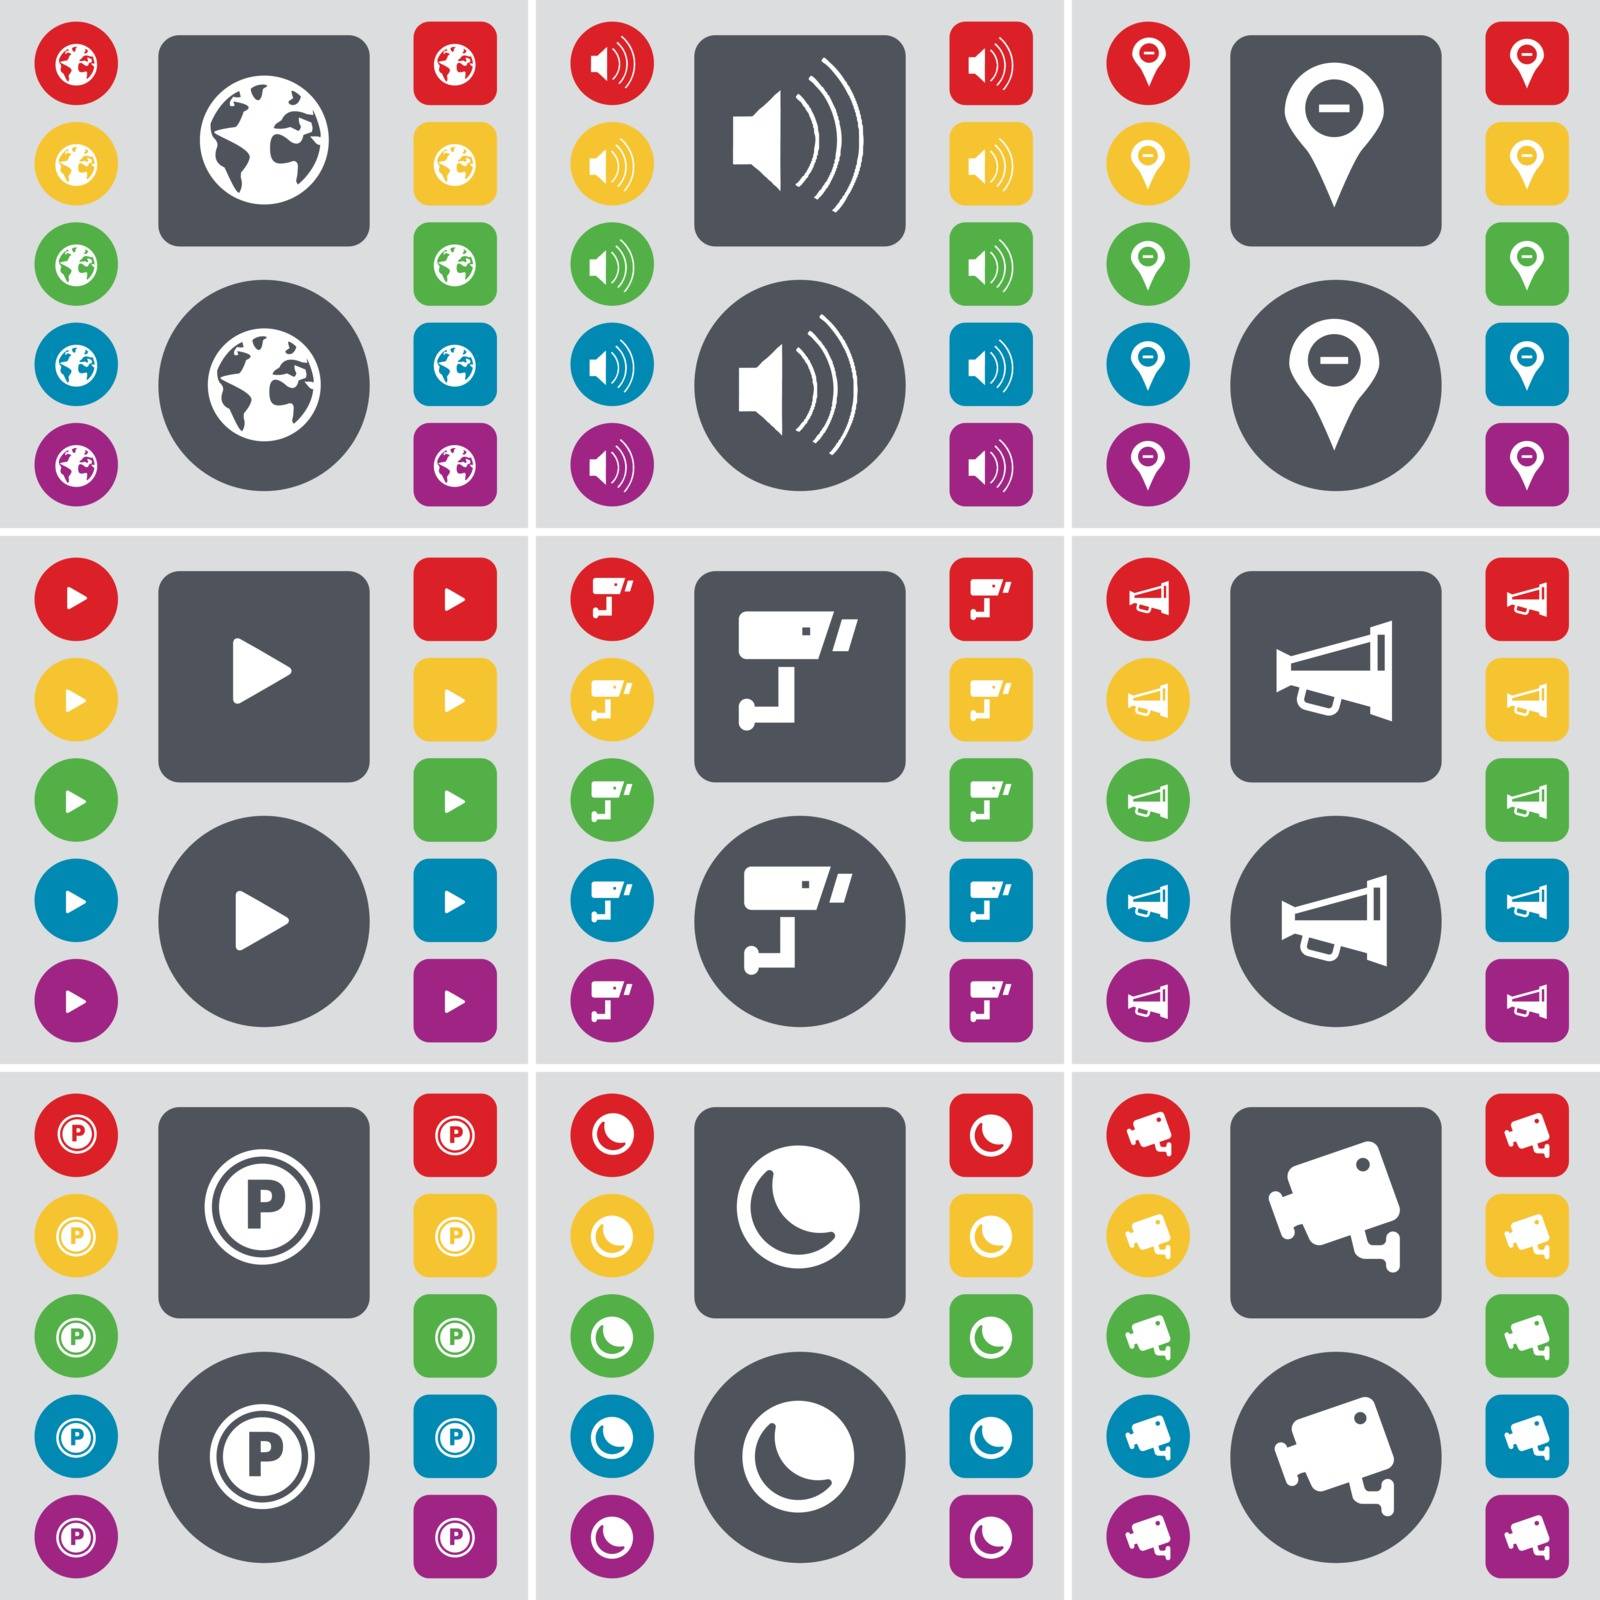 Earth, Sound, Checkpoint, Media play, CCTV, Megaphone, Parking, Moon, CCTV icon symbol. A large set of flat, colored buttons for your design. Vector by serhii_lohvyniuk